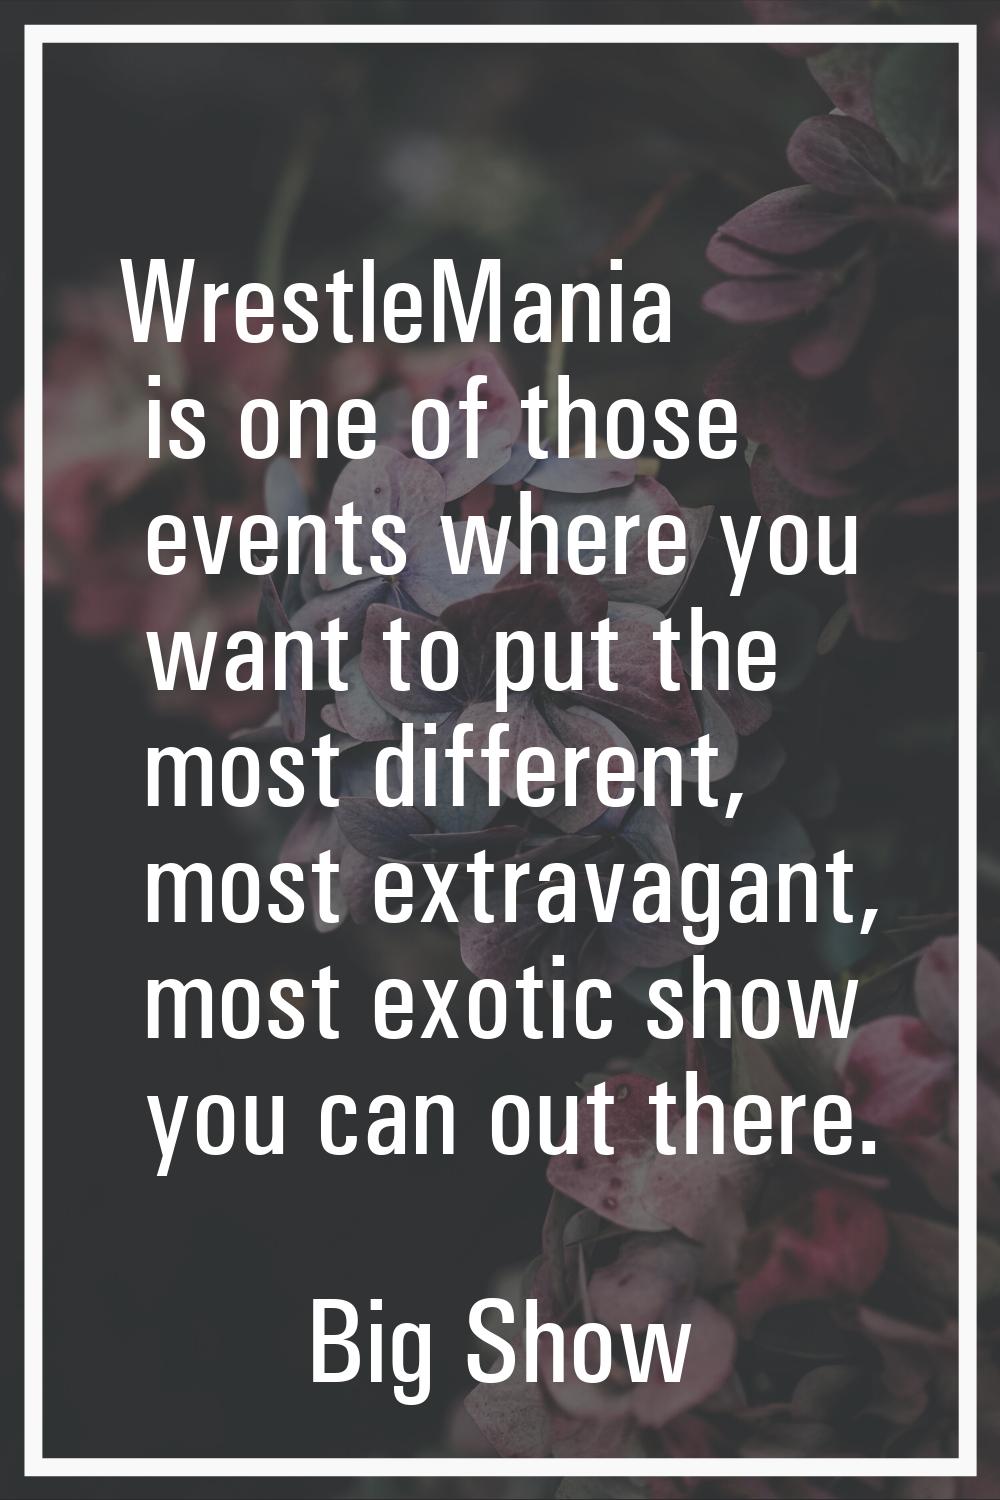 WrestleMania is one of those events where you want to put the most different, most extravagant, mos